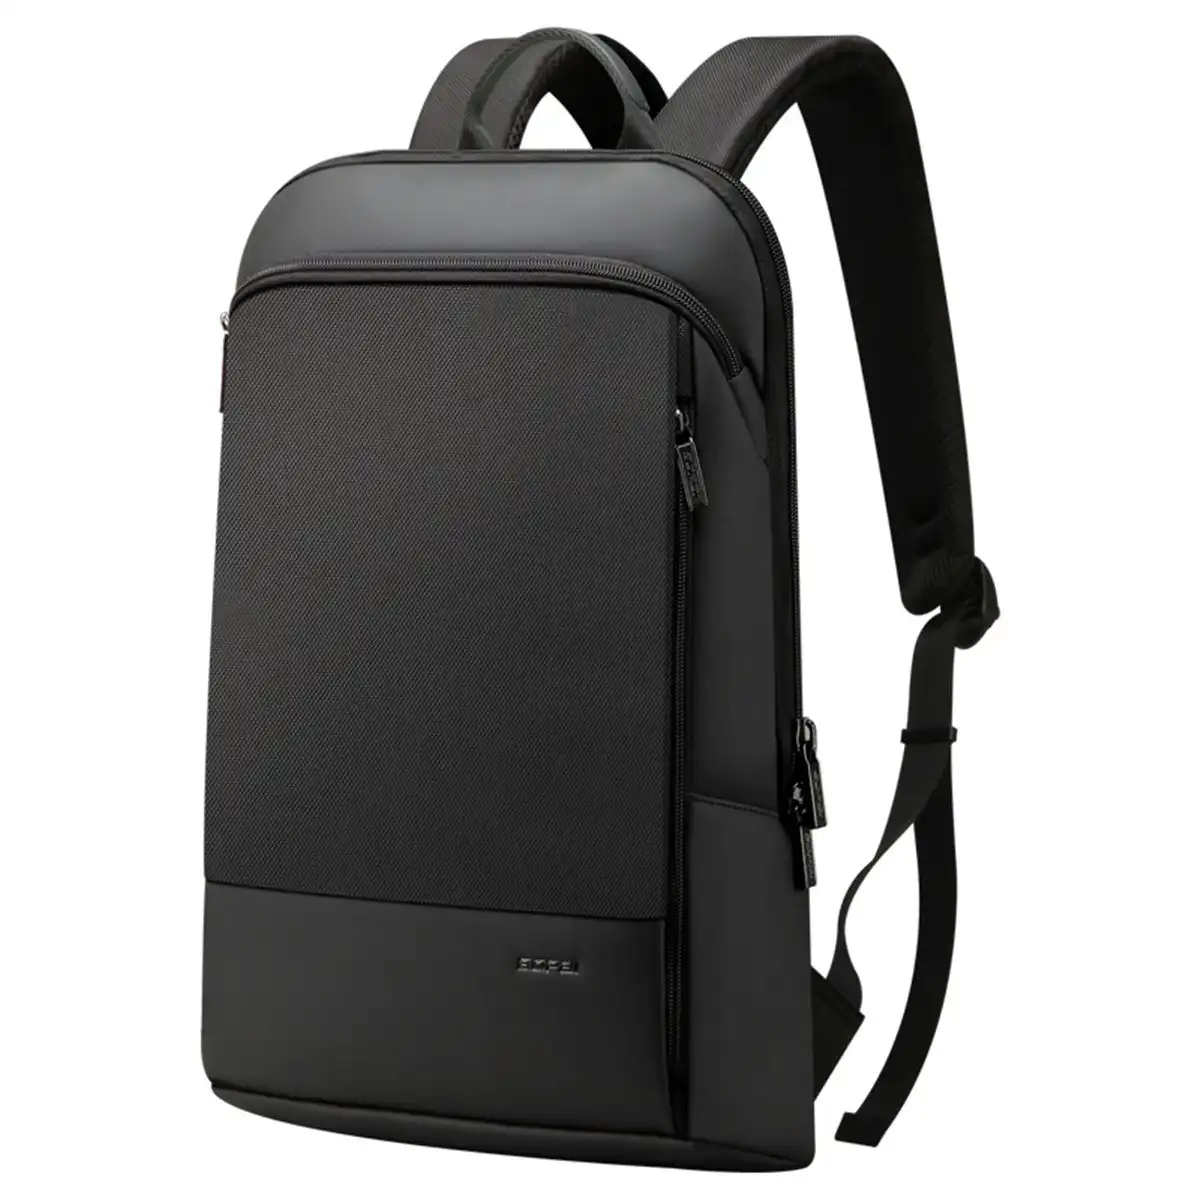 Bopai Anti-Theft Smart 17" Laptop Backpack & USB Charging Luxury Leather Business Bag B85011